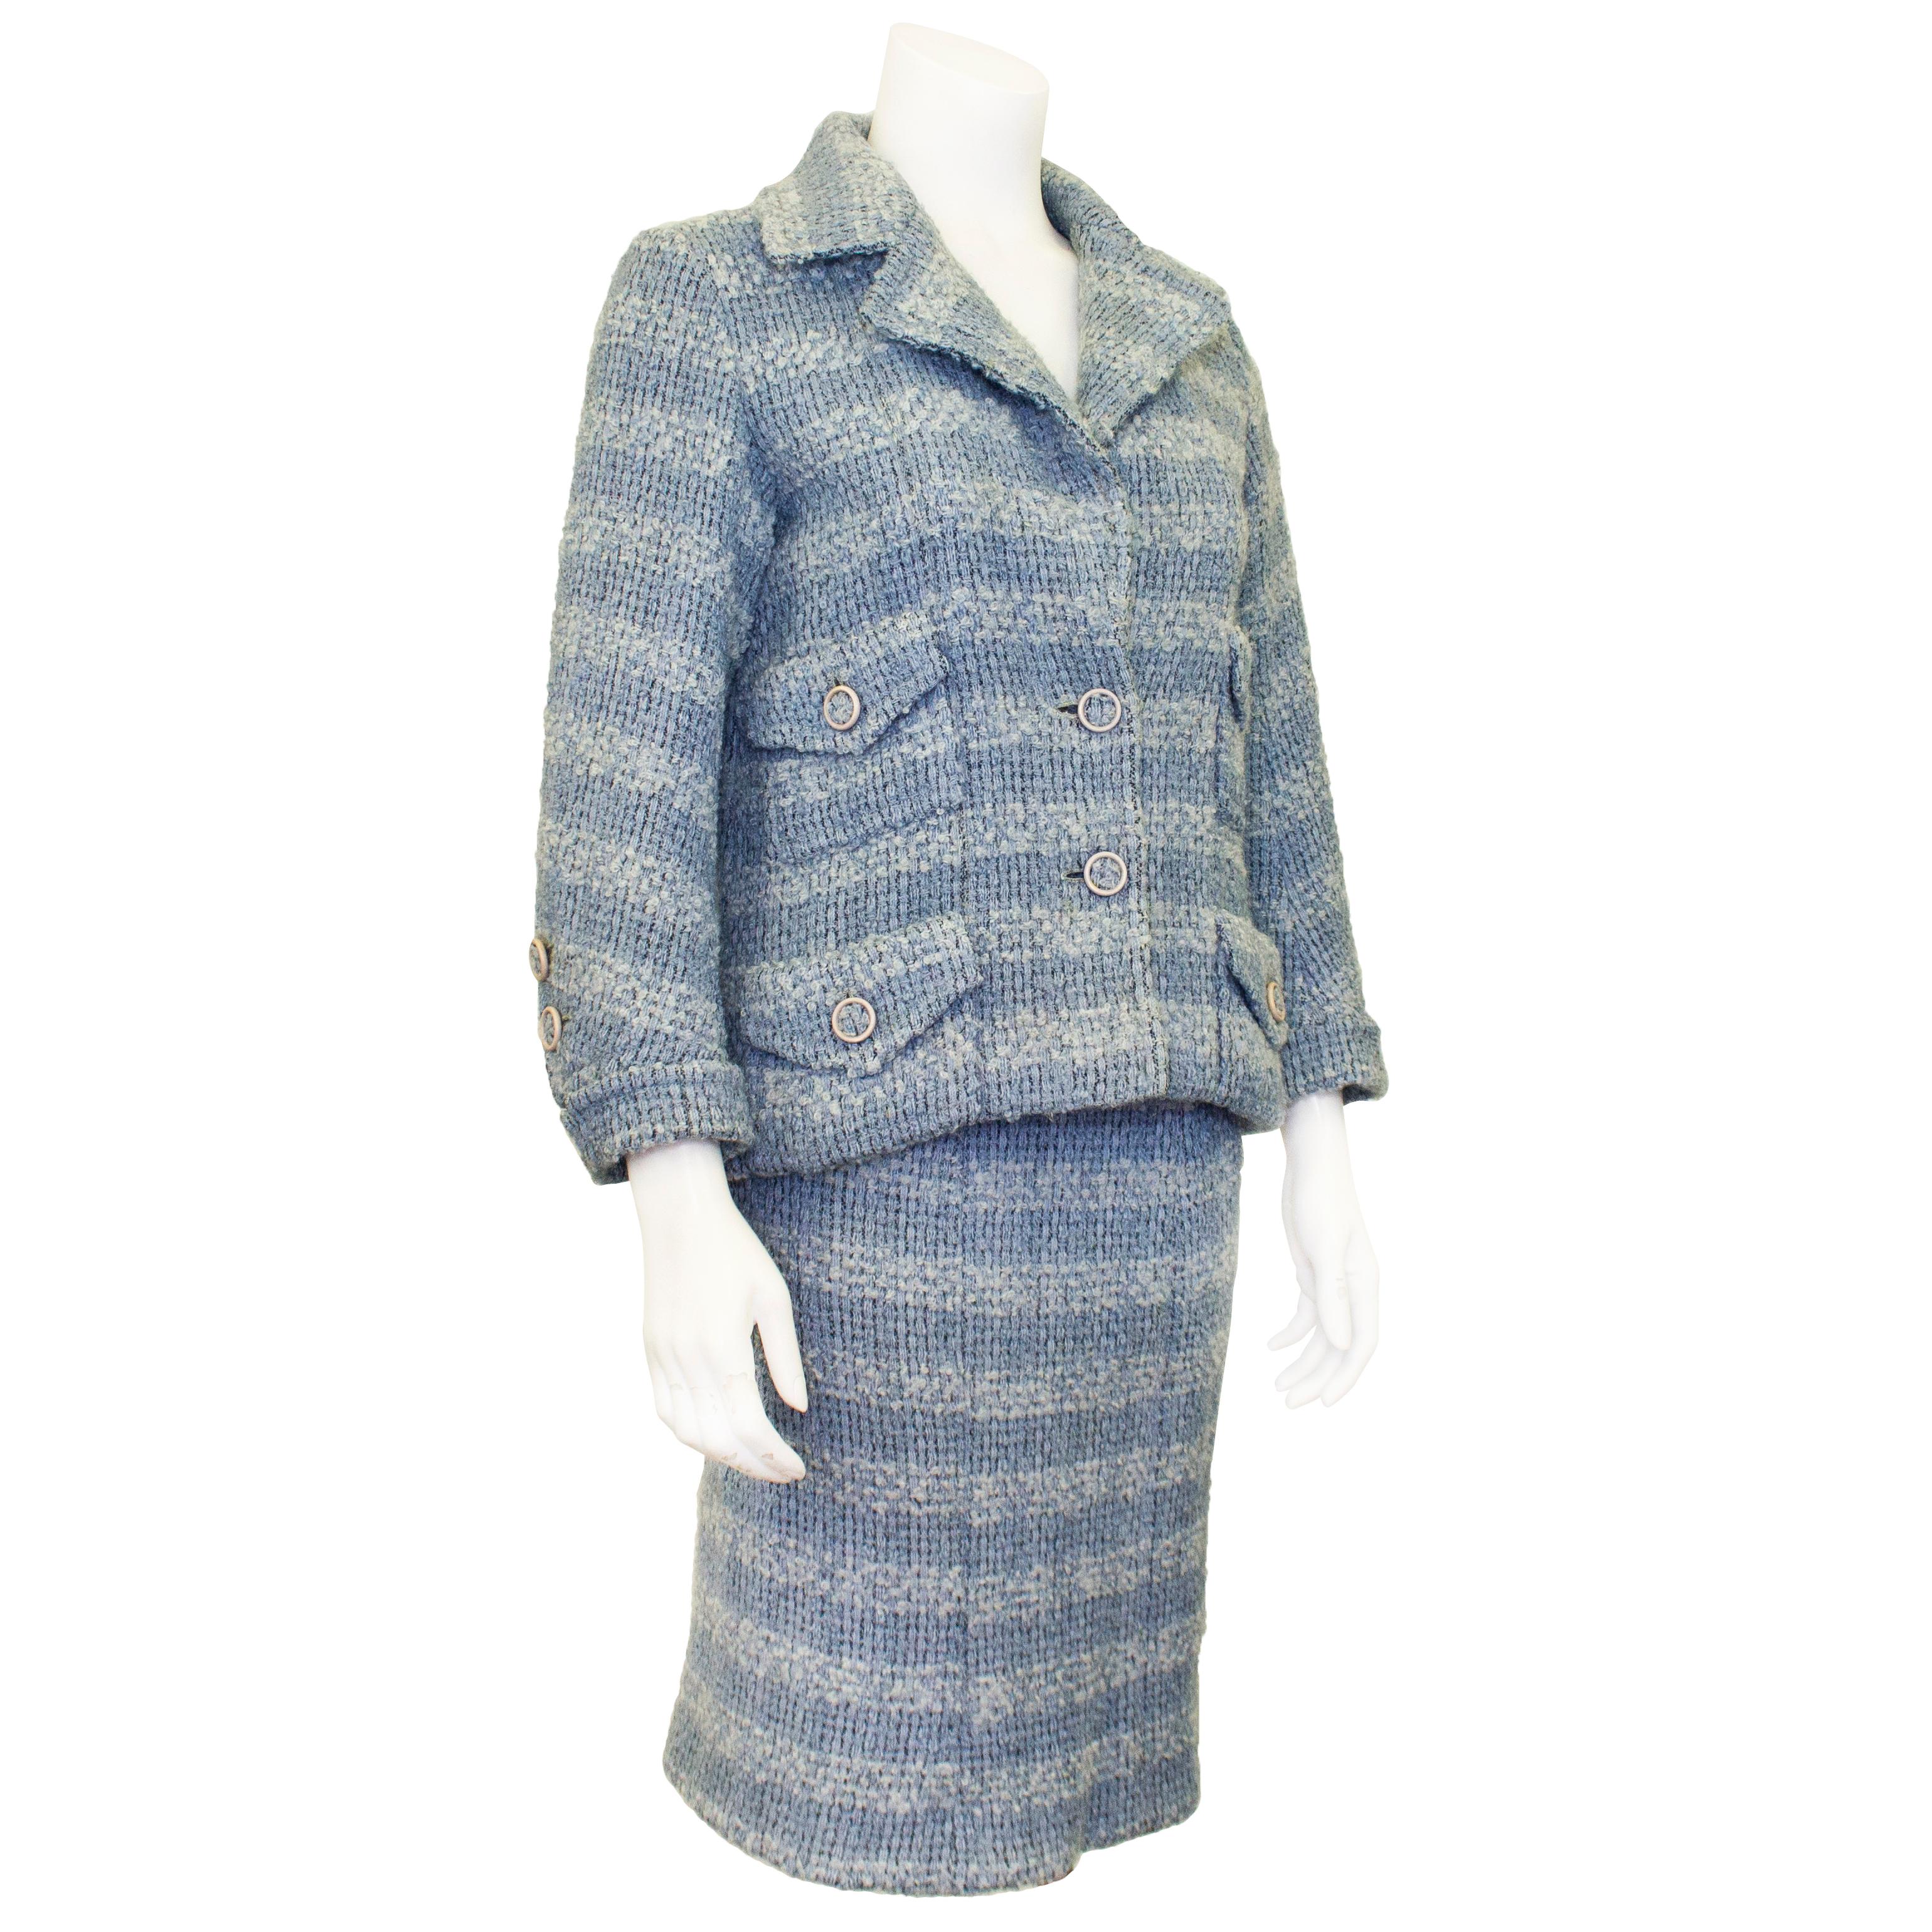 Beautiful Chanel Haute Couture suit dating from the 1950s. Alternating two tone pale blue wool tweed with matching blue tweed buttons with white trim. The jacket features a notched collar with four patch flap pockets and folded cuffs. The skirt is